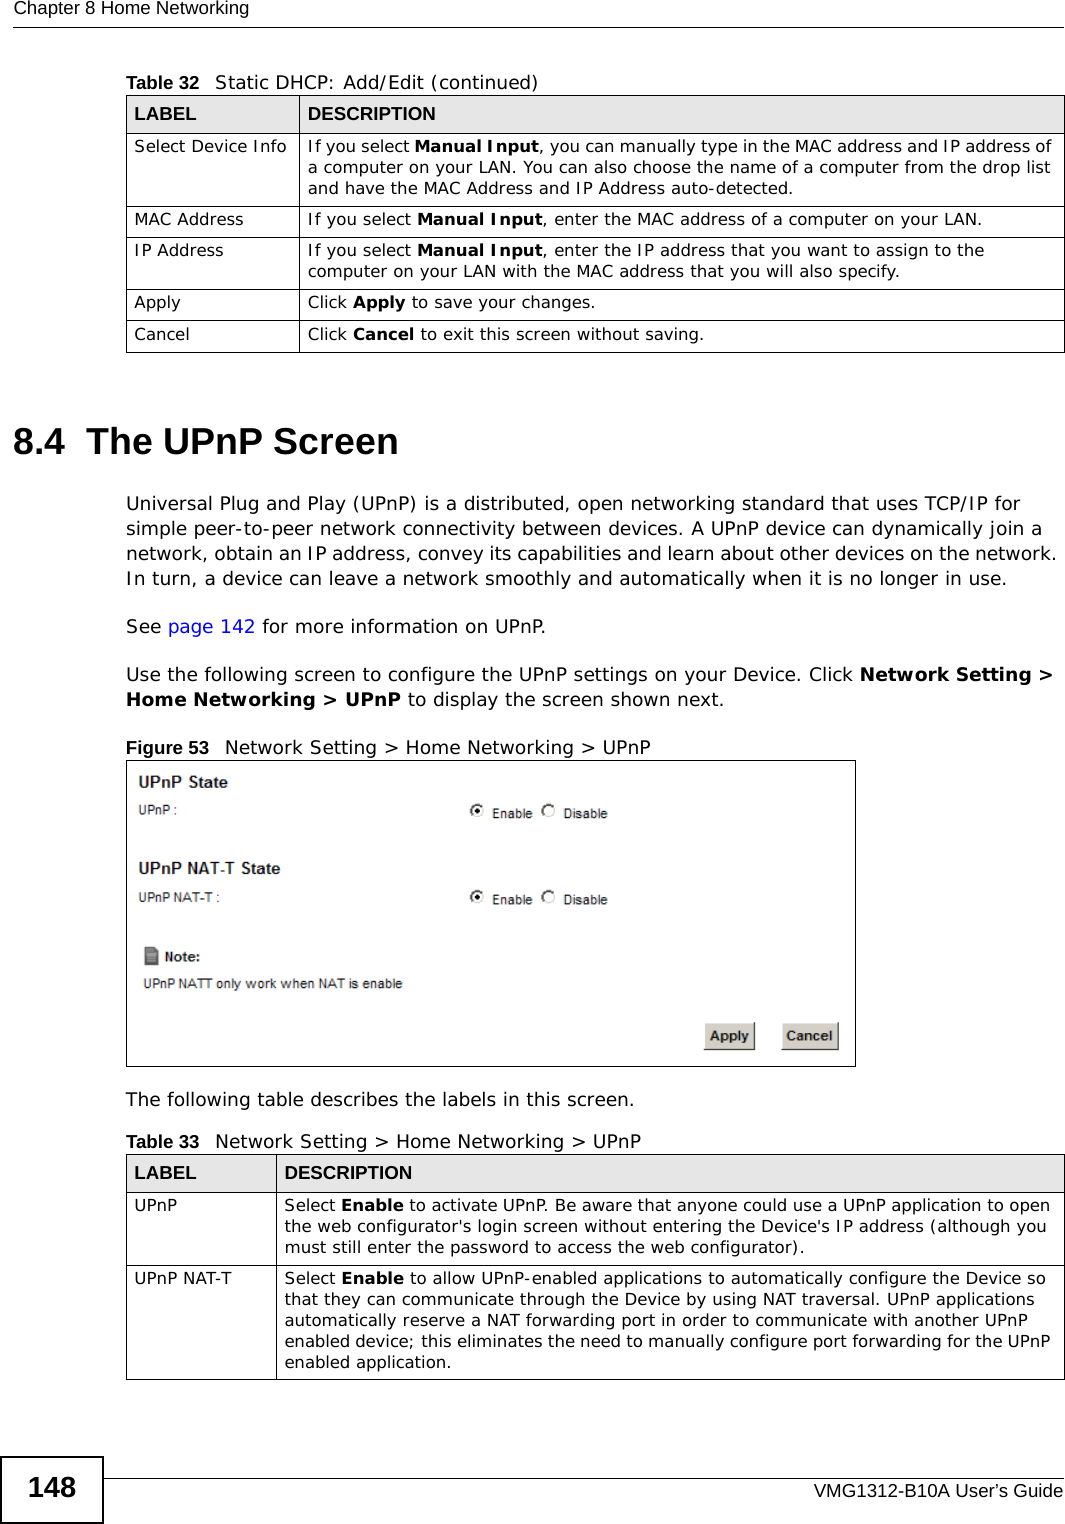 Chapter 8 Home NetworkingVMG1312-B10A User’s Guide1488.4  The UPnP ScreenUniversal Plug and Play (UPnP) is a distributed, open networking standard that uses TCP/IP for simple peer-to-peer network connectivity between devices. A UPnP device can dynamically join a network, obtain an IP address, convey its capabilities and learn about other devices on the network. In turn, a device can leave a network smoothly and automatically when it is no longer in use.See page 142 for more information on UPnP.Use the following screen to configure the UPnP settings on your Device. Click Network Setting &gt; Home Networking &gt; UPnP to display the screen shown next.Figure 53   Network Setting &gt; Home Networking &gt; UPnPThe following table describes the labels in this screen.Select Device Info If you select Manual Input, you can manually type in the MAC address and IP address of a computer on your LAN. You can also choose the name of a computer from the drop list and have the MAC Address and IP Address auto-detected.MAC Address If you select Manual Input, enter the MAC address of a computer on your LAN.IP Address If you select Manual Input, enter the IP address that you want to assign to the computer on your LAN with the MAC address that you will also specify.Apply Click Apply to save your changes.Cancel Click Cancel to exit this screen without saving.Table 32   Static DHCP: Add/Edit (continued)LABEL DESCRIPTIONTable 33   Network Setting &gt; Home Networking &gt; UPnPLABEL DESCRIPTIONUPnP Select Enable to activate UPnP. Be aware that anyone could use a UPnP application to open the web configurator&apos;s login screen without entering the Device&apos;s IP address (although you must still enter the password to access the web configurator).UPnP NAT-T Select Enable to allow UPnP-enabled applications to automatically configure the Device so that they can communicate through the Device by using NAT traversal. UPnP applications automatically reserve a NAT forwarding port in order to communicate with another UPnP enabled device; this eliminates the need to manually configure port forwarding for the UPnP enabled application. 